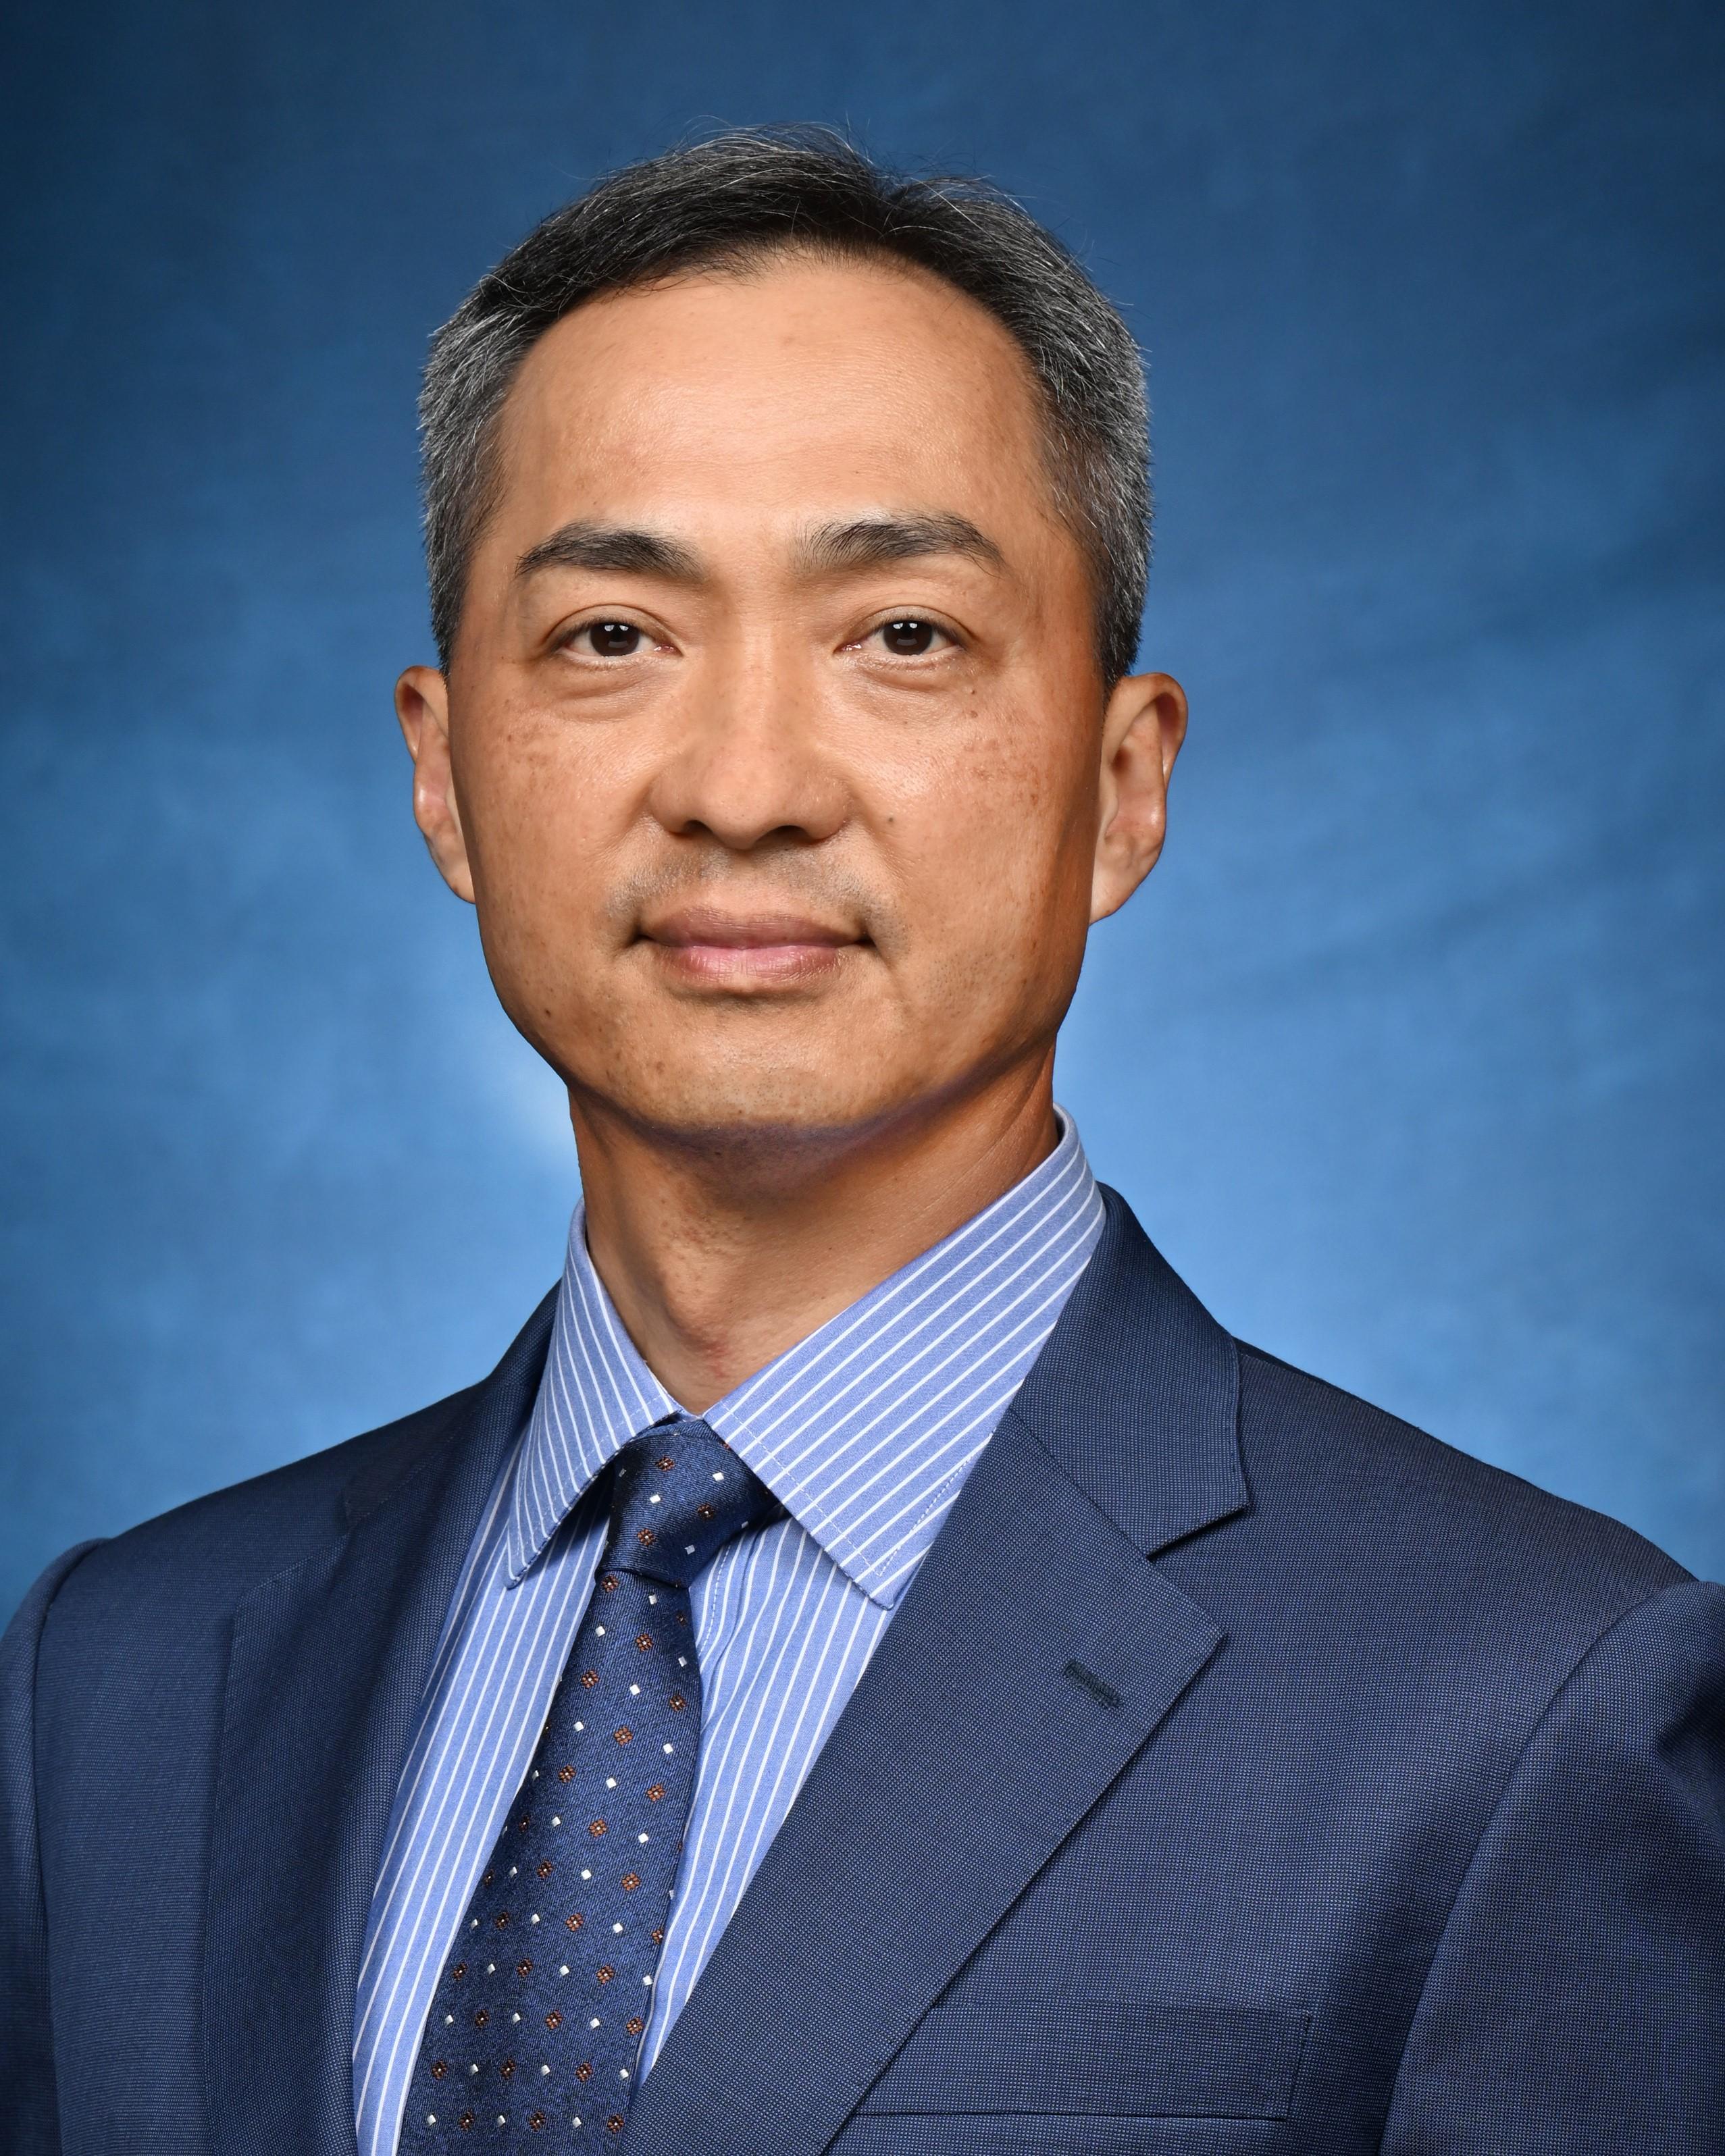 The Government announced today (June 1) the appointment of Mr Kwok Yam-shu as the Head of the Civil Service College, following an open-cum-in-service recruitment exercise. Mr Kwok will take up the appointment on July 5, 2022.